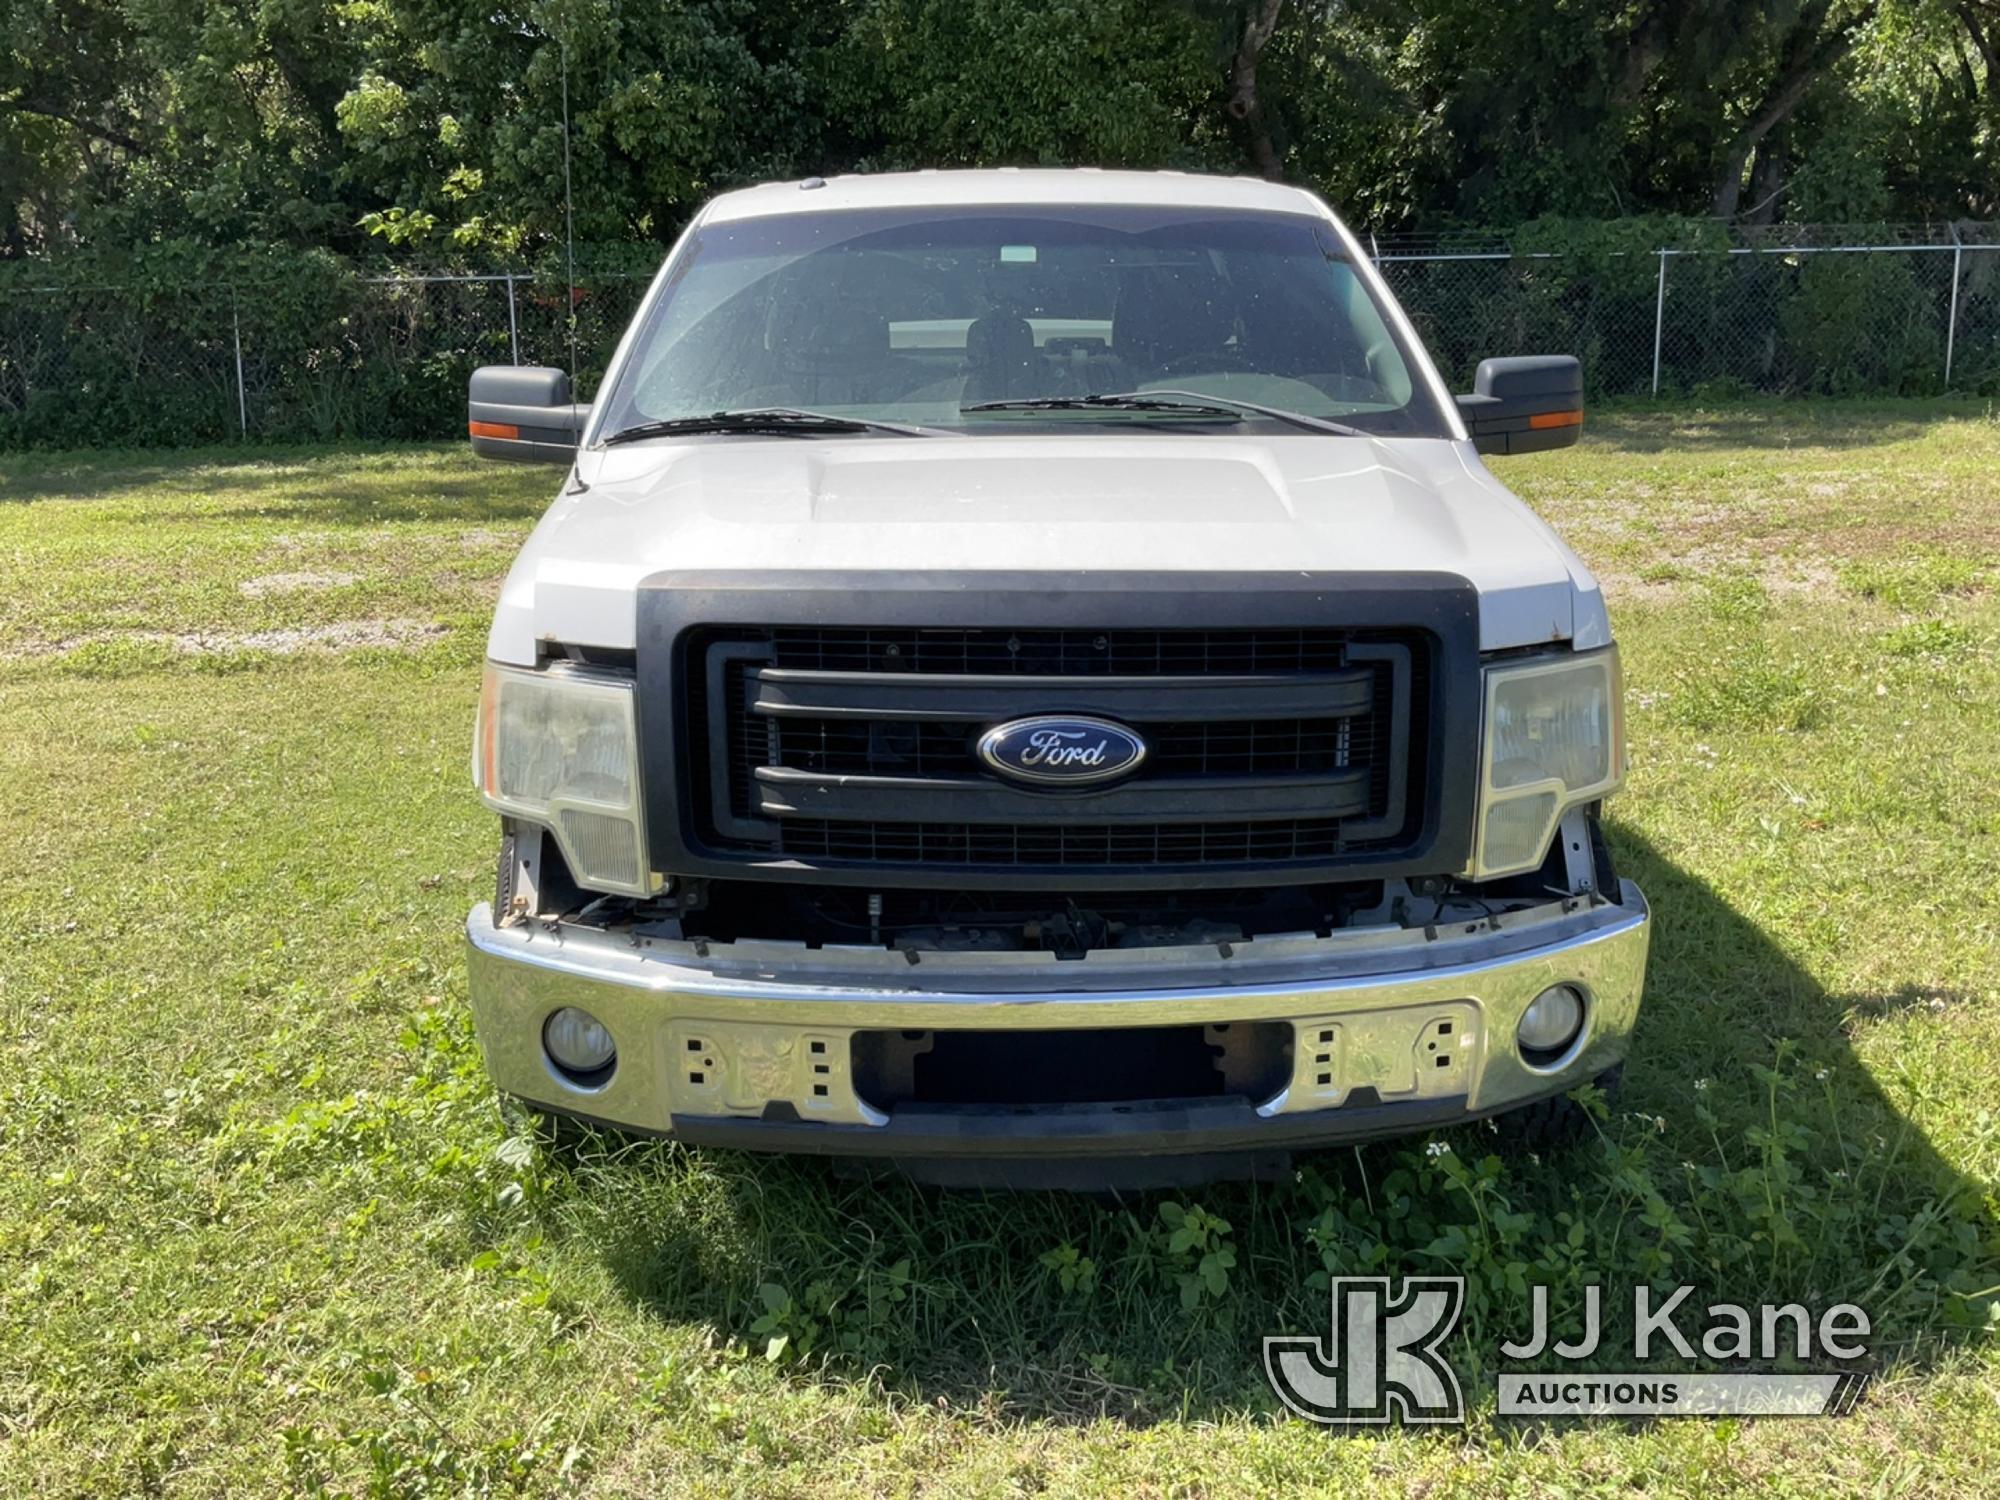 (Tampa, FL) 2014 Ford F150 Extended-Cab Pickup Truck Runs & Moves) (Has Steering Issues, Missing Par